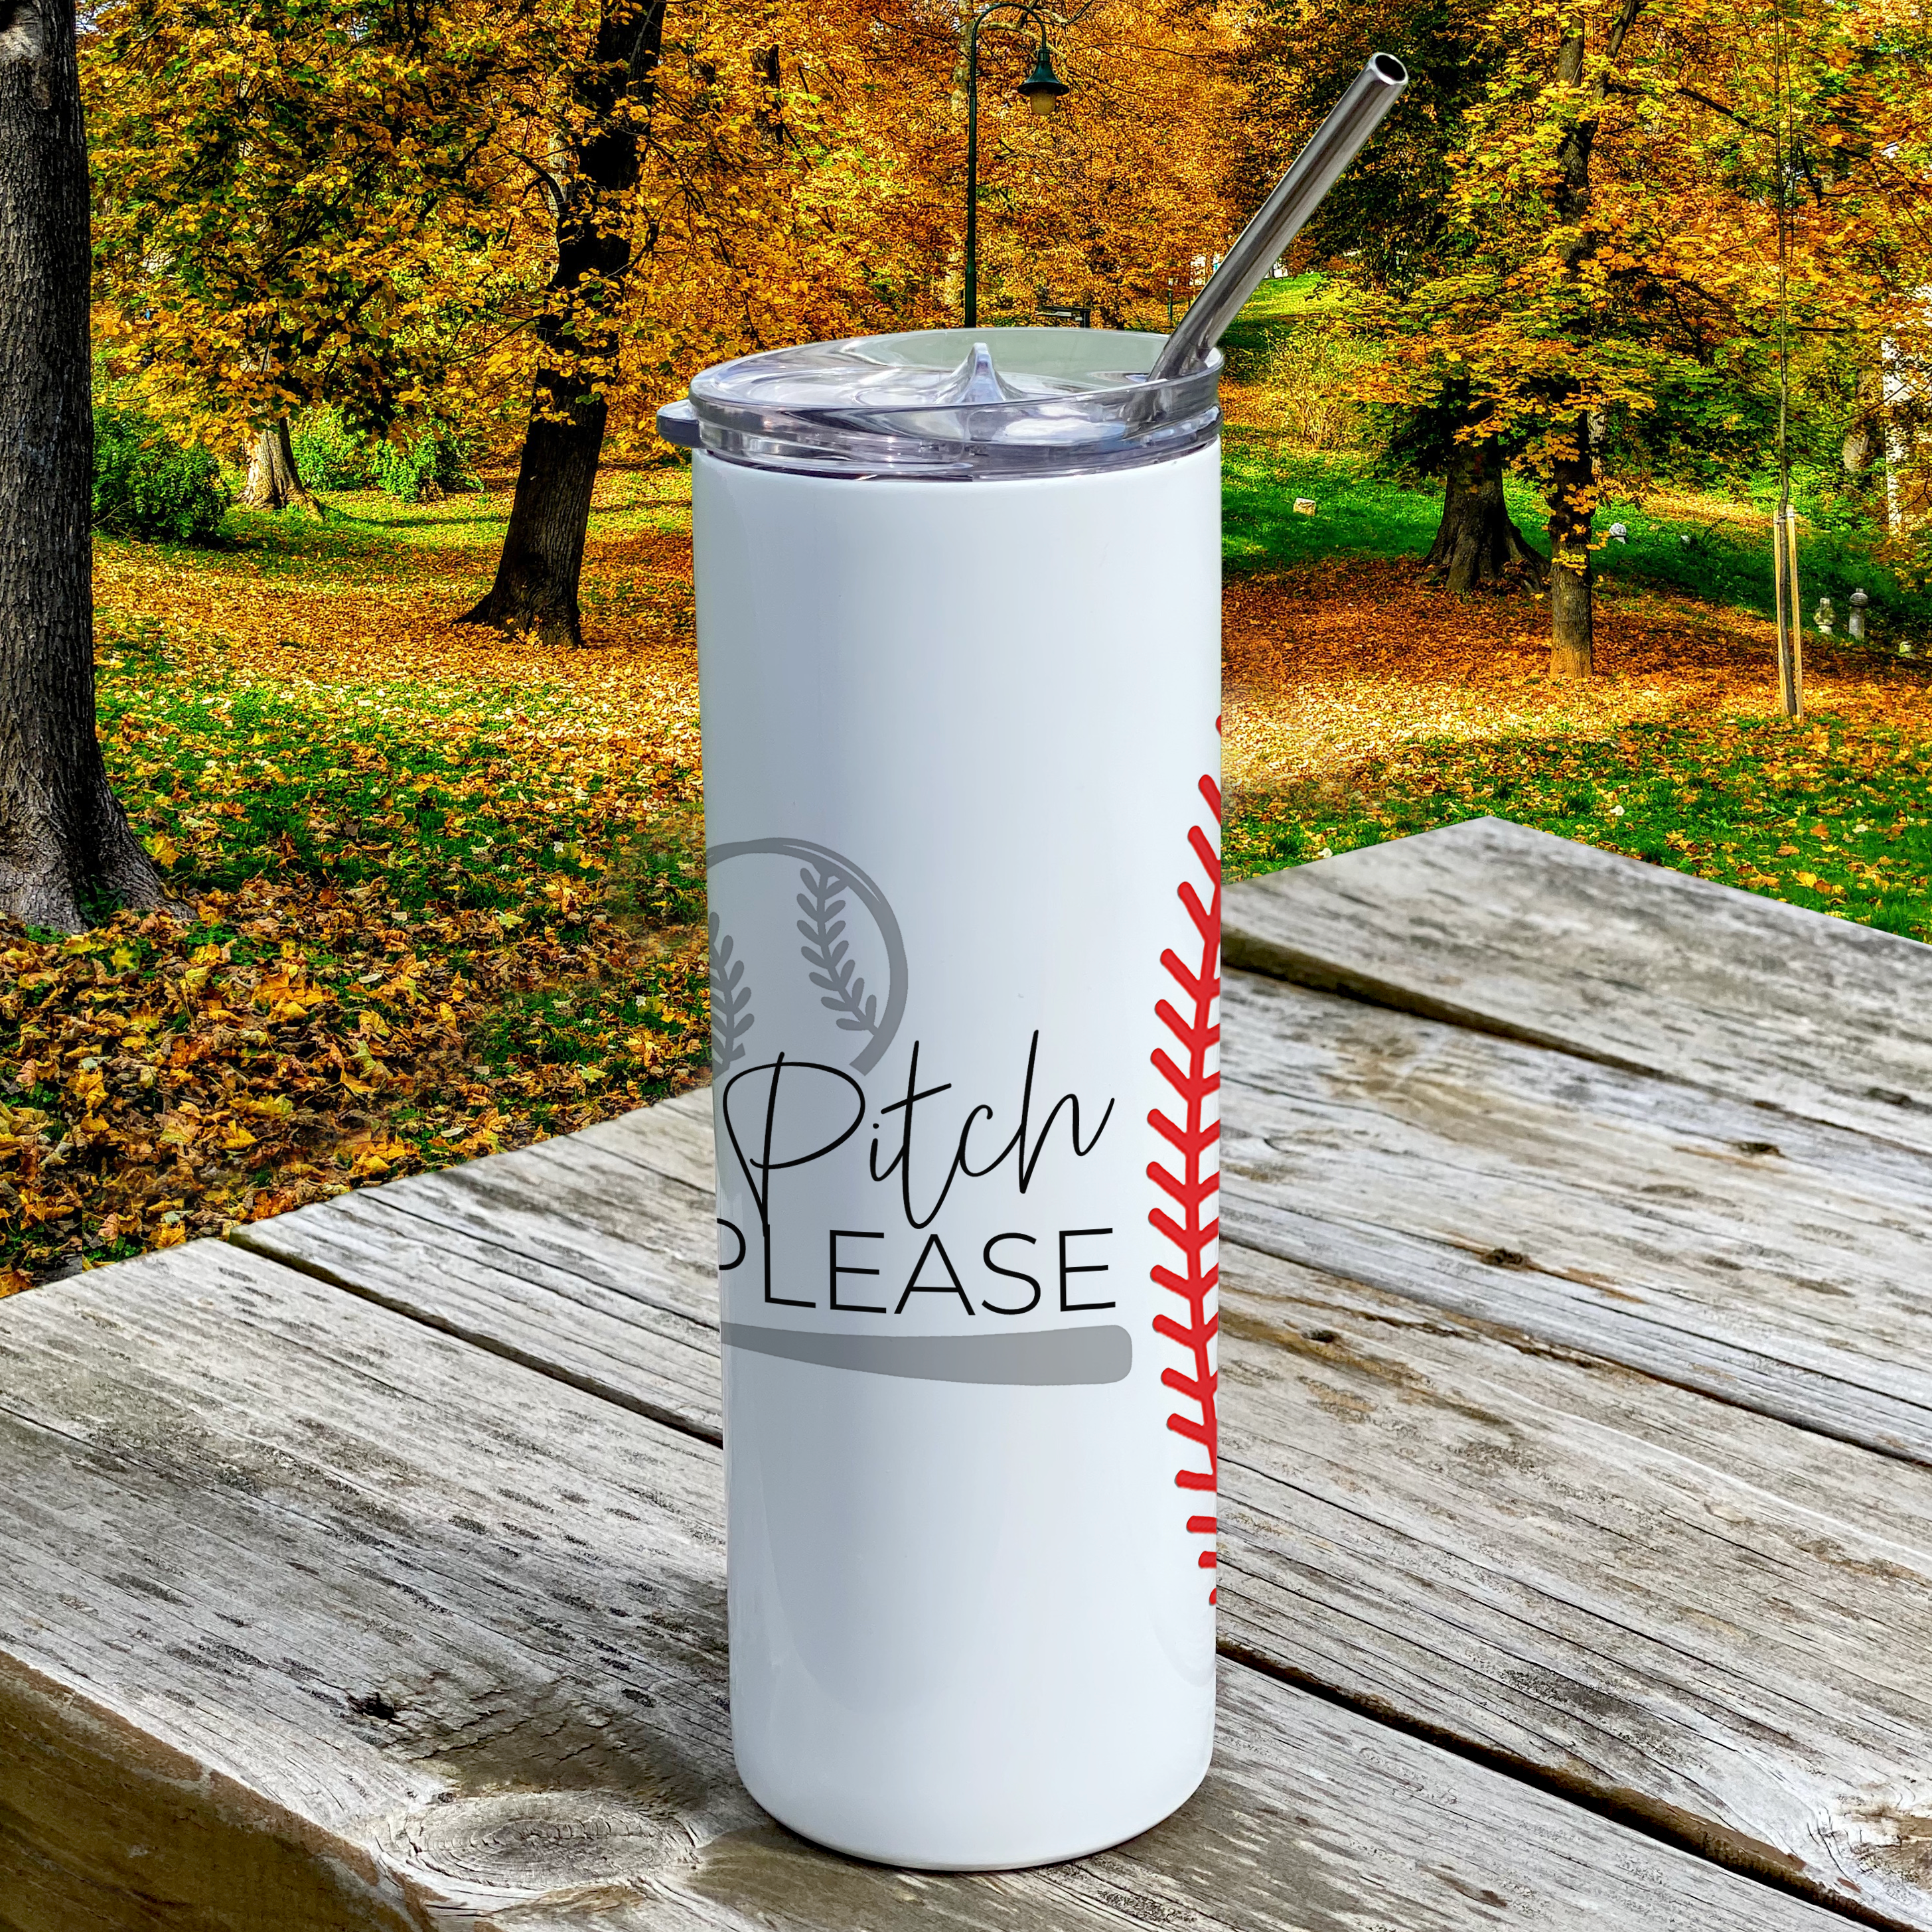 Sports Collection (Pitch Please - Baseball) 20 Oz Stainless Steel Travel Tumbler with Straw